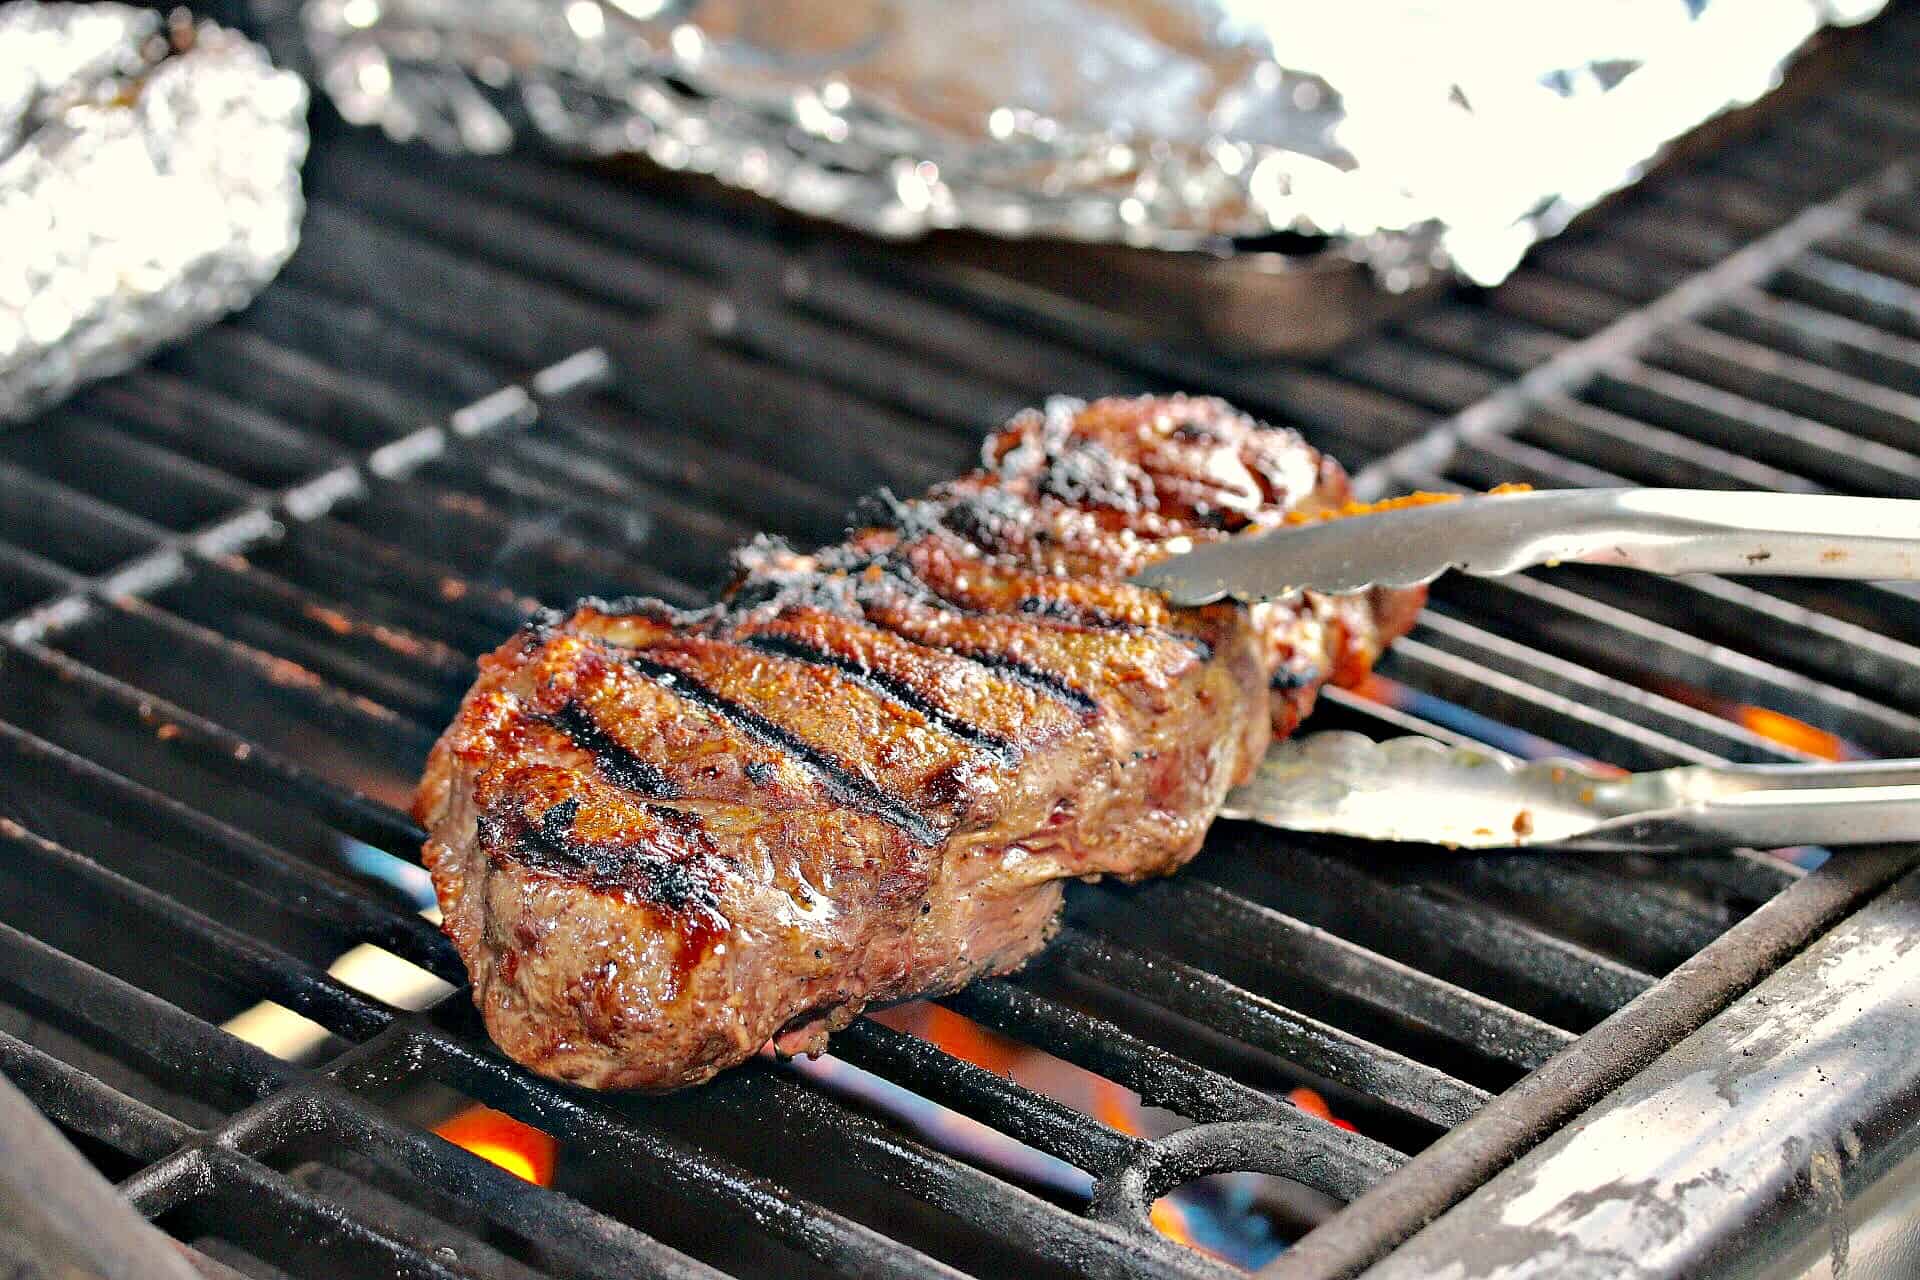 A seasoned steak on a grill with kitchen tongs lifting it up.